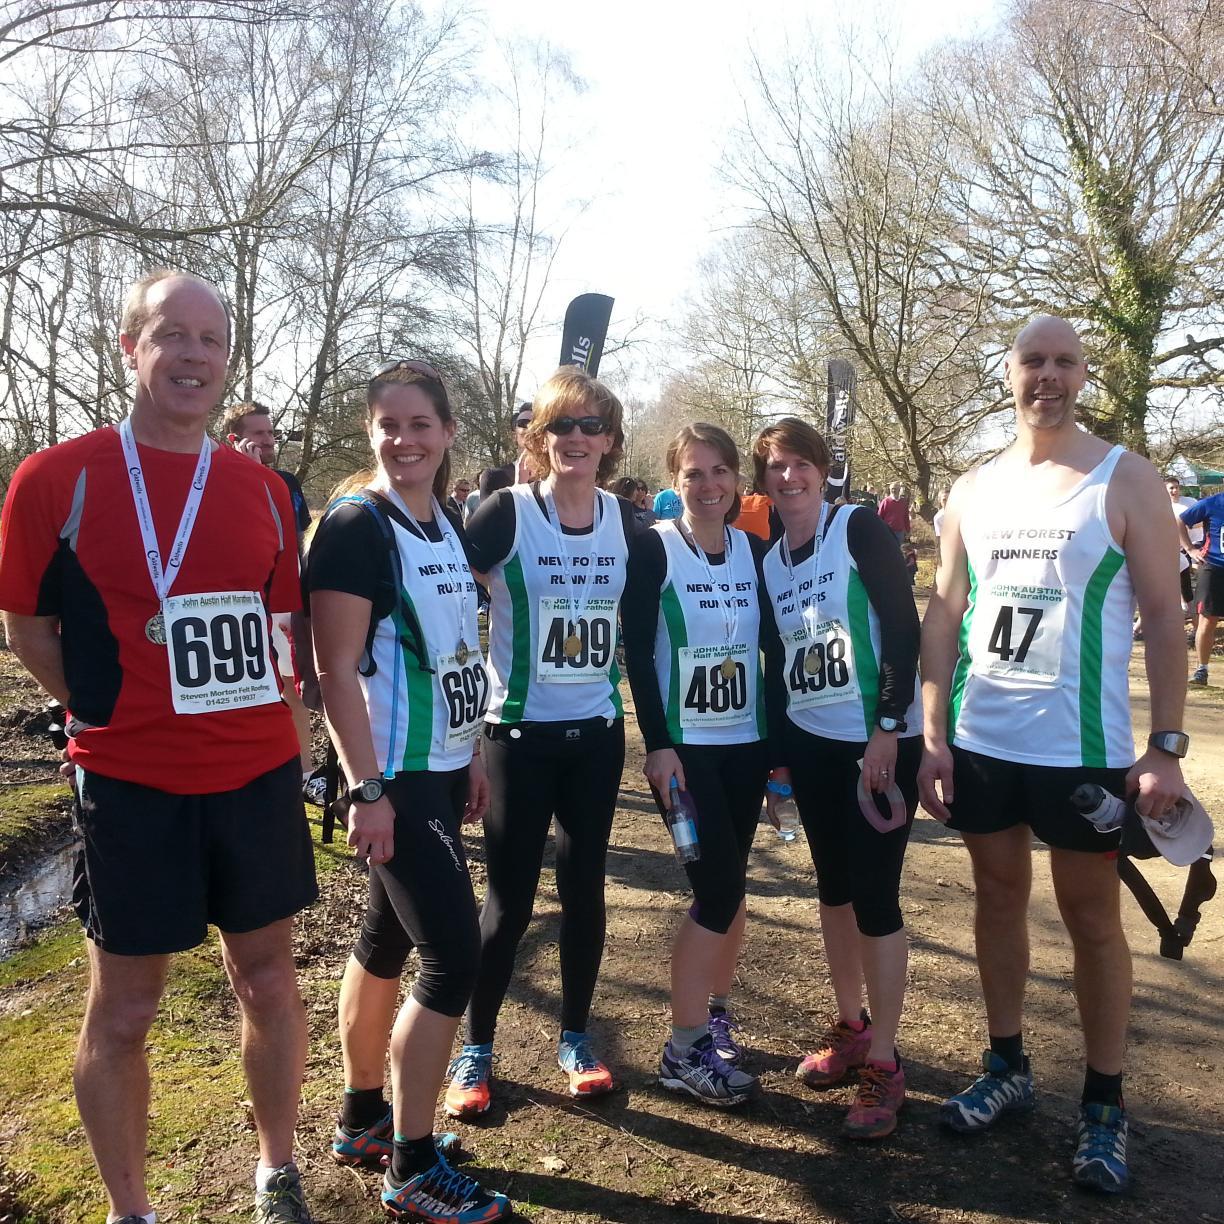 New Forest Runners was formed in 1981 to encourage and support running for pleasure and as a means of keeping fit.